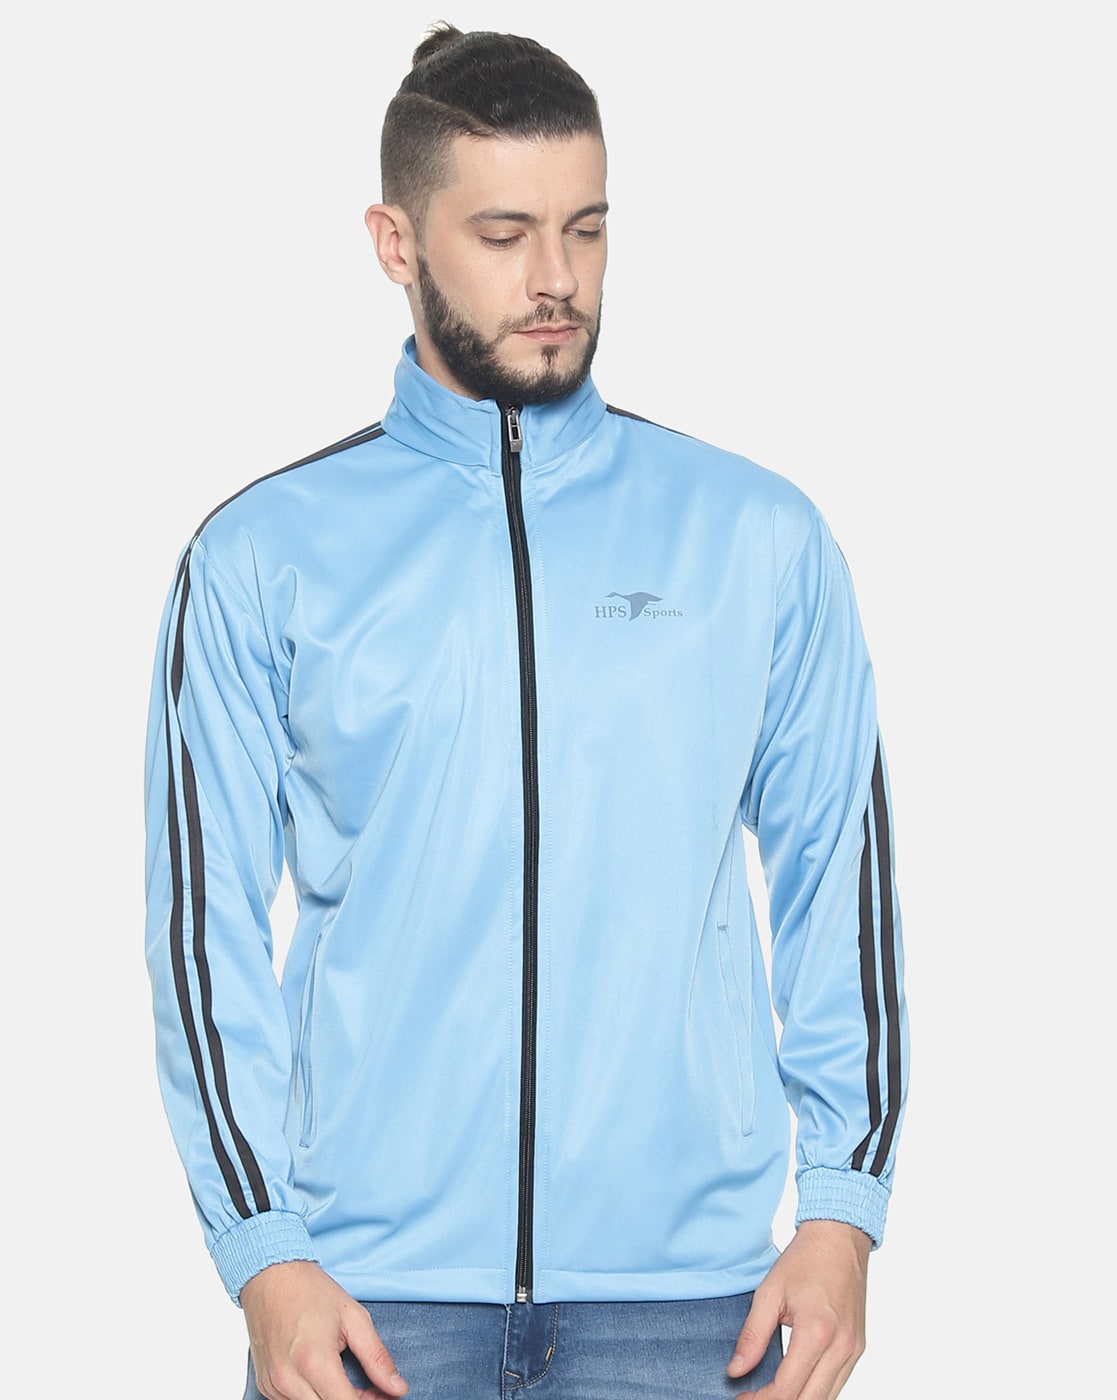 Sports Jackets - Buy Sports Jackets Online at Best Prices in India |  Flipkart.com